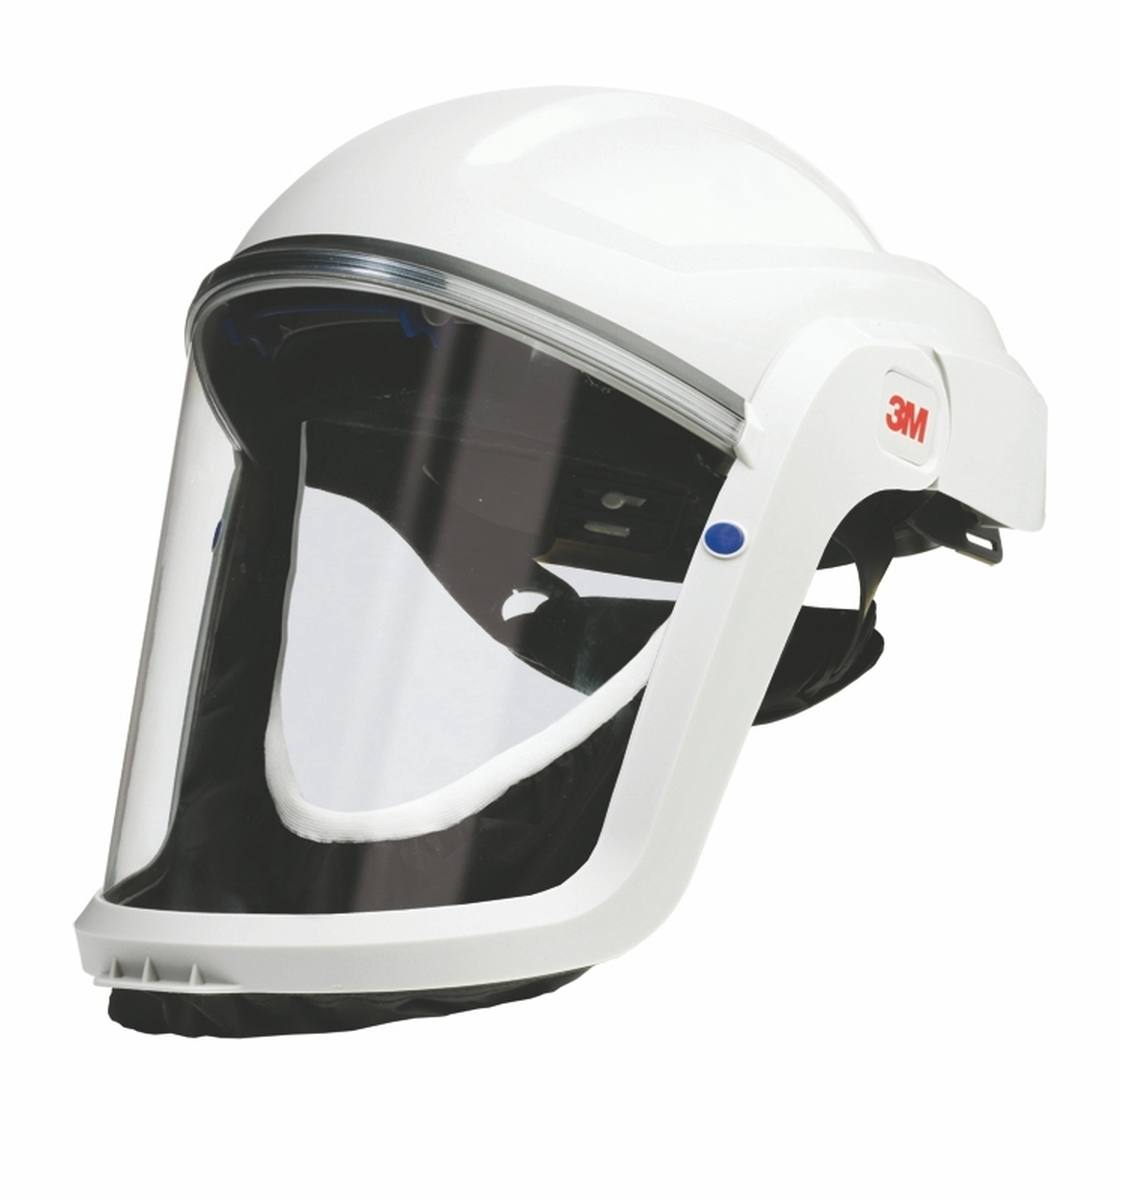 3M Versaflo Safety helmet M207 with flame-retardant face seal and polycarbonate visor, clear